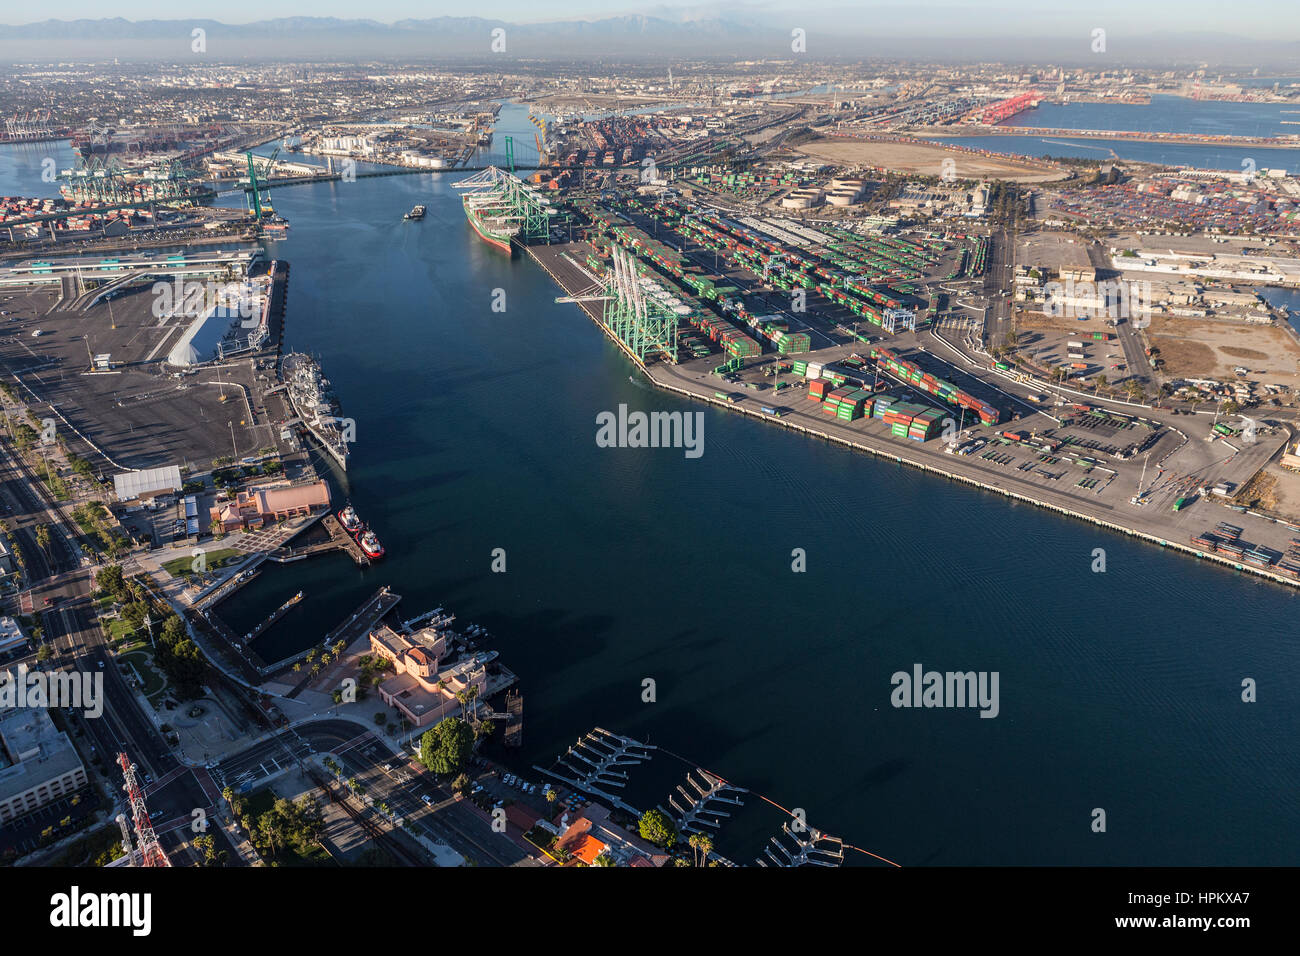 Los Angeles, California, USA - August 16, 2016:  Afternoon aerial view of the main channel in the San Pedro area of Los Angeles harbor. Stock Photo